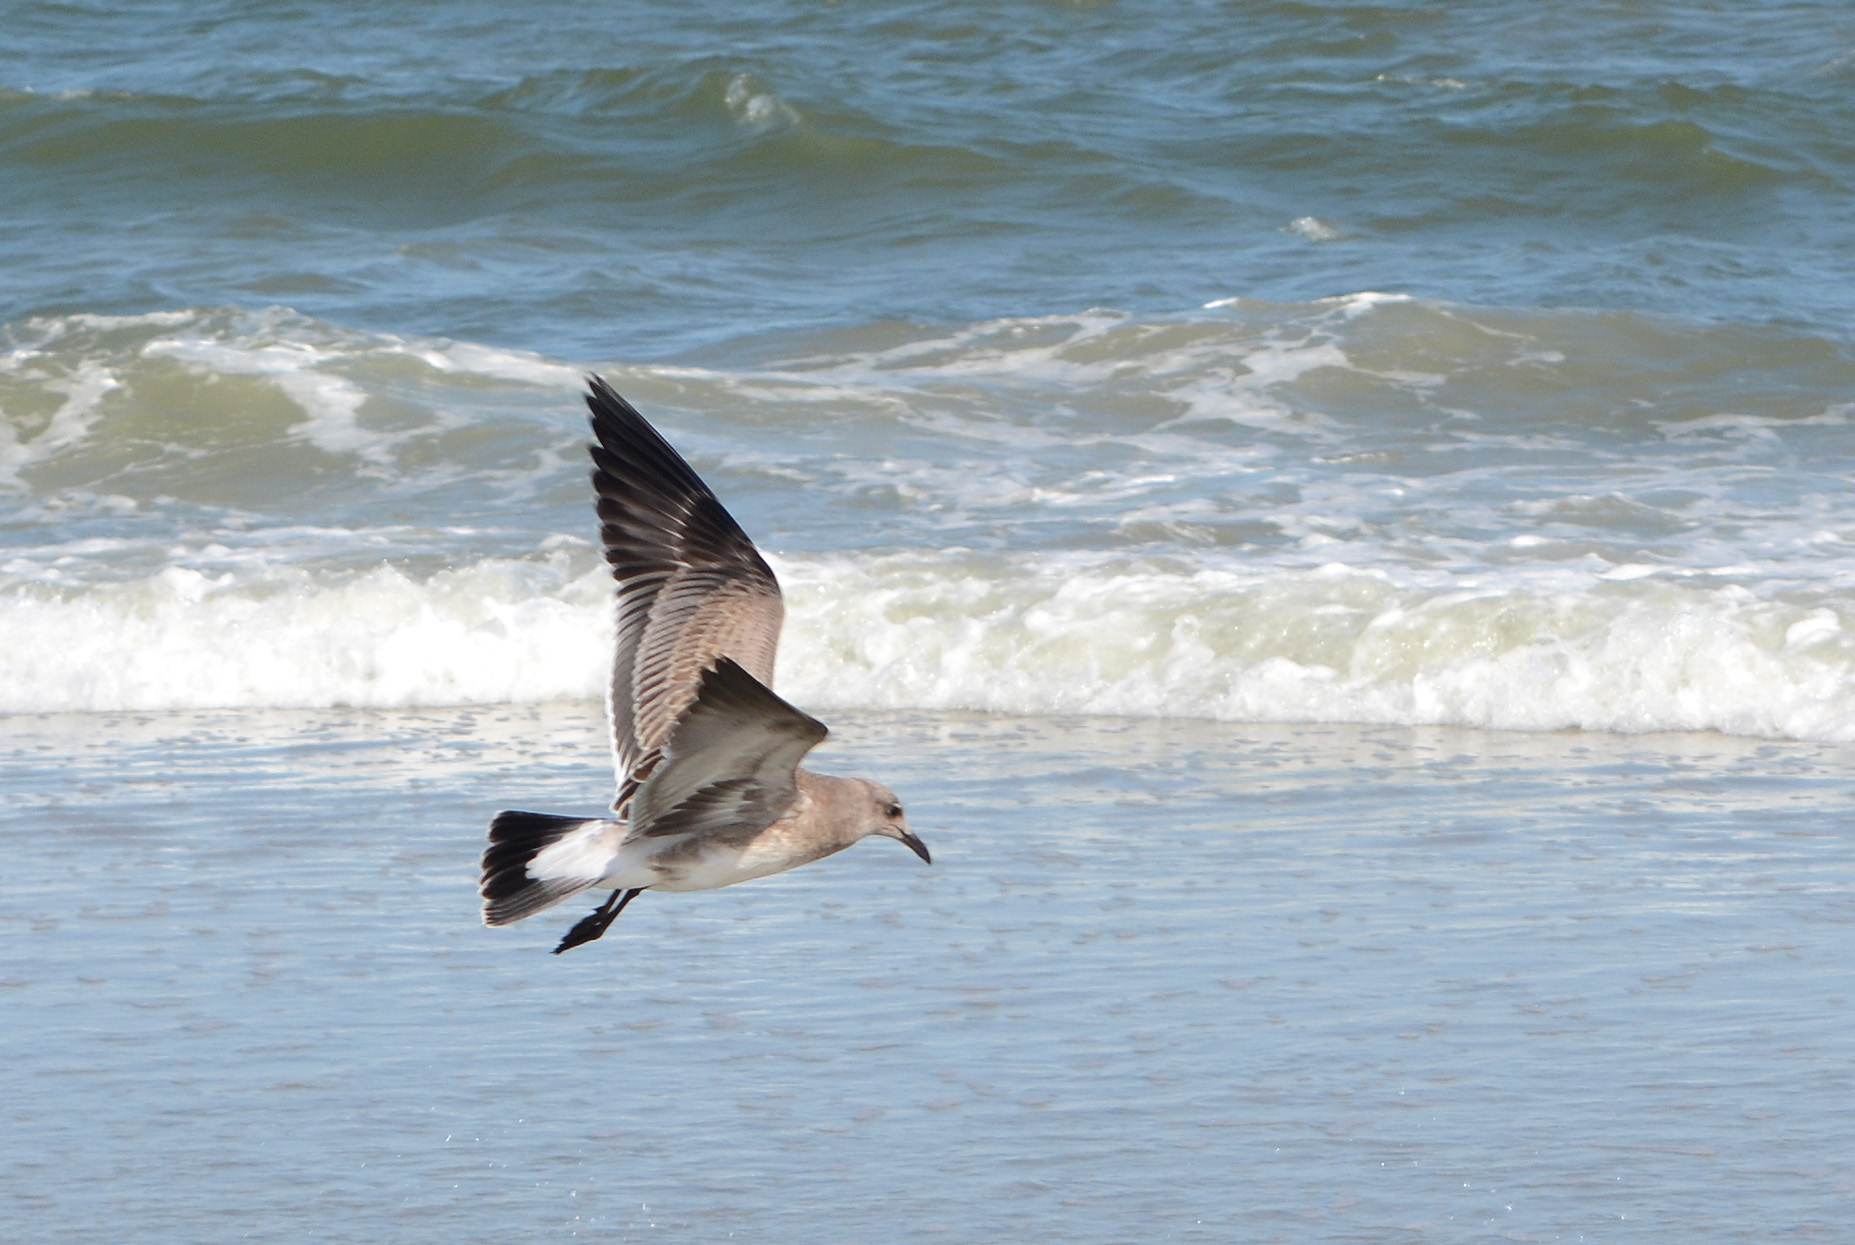 Seagull in flight 1.jpg undefined by WPC-372